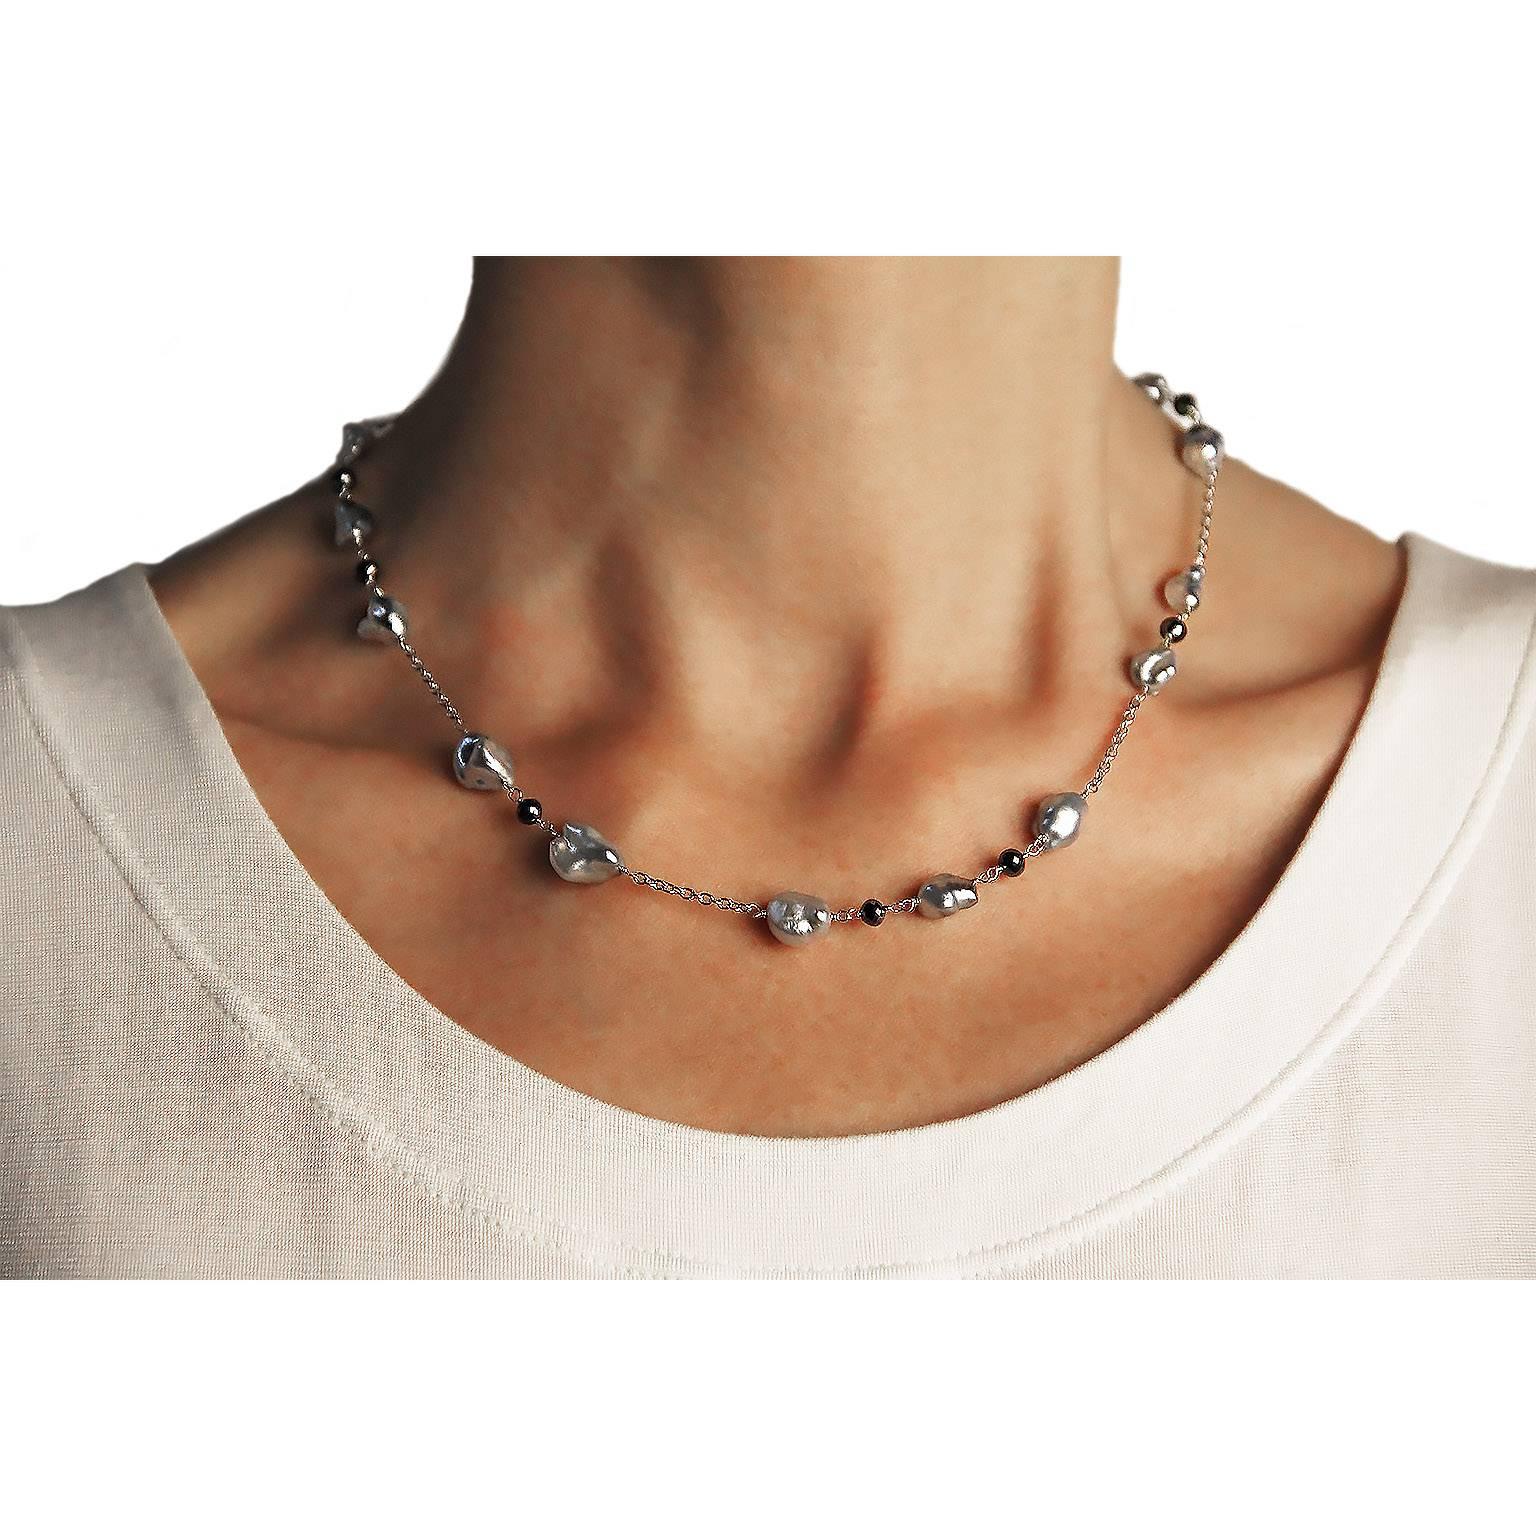 Jona design collection, hand crafted in Italy, 18 karat white gold, 18.5 in/47 cm long necklace with 16 keshi grey Tahiti pearls, alternating with 10 briolette cut black diamonds.

All Jona jewelry is new and has never been previously owned or